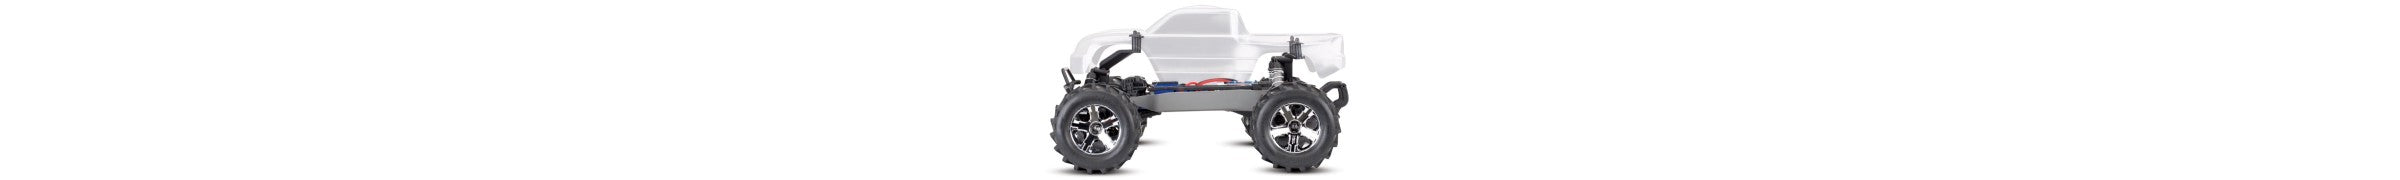 Parts for 67014-4 Traxxas Stampede 4WD 1/10 Monster Truck Un-assembled Kit